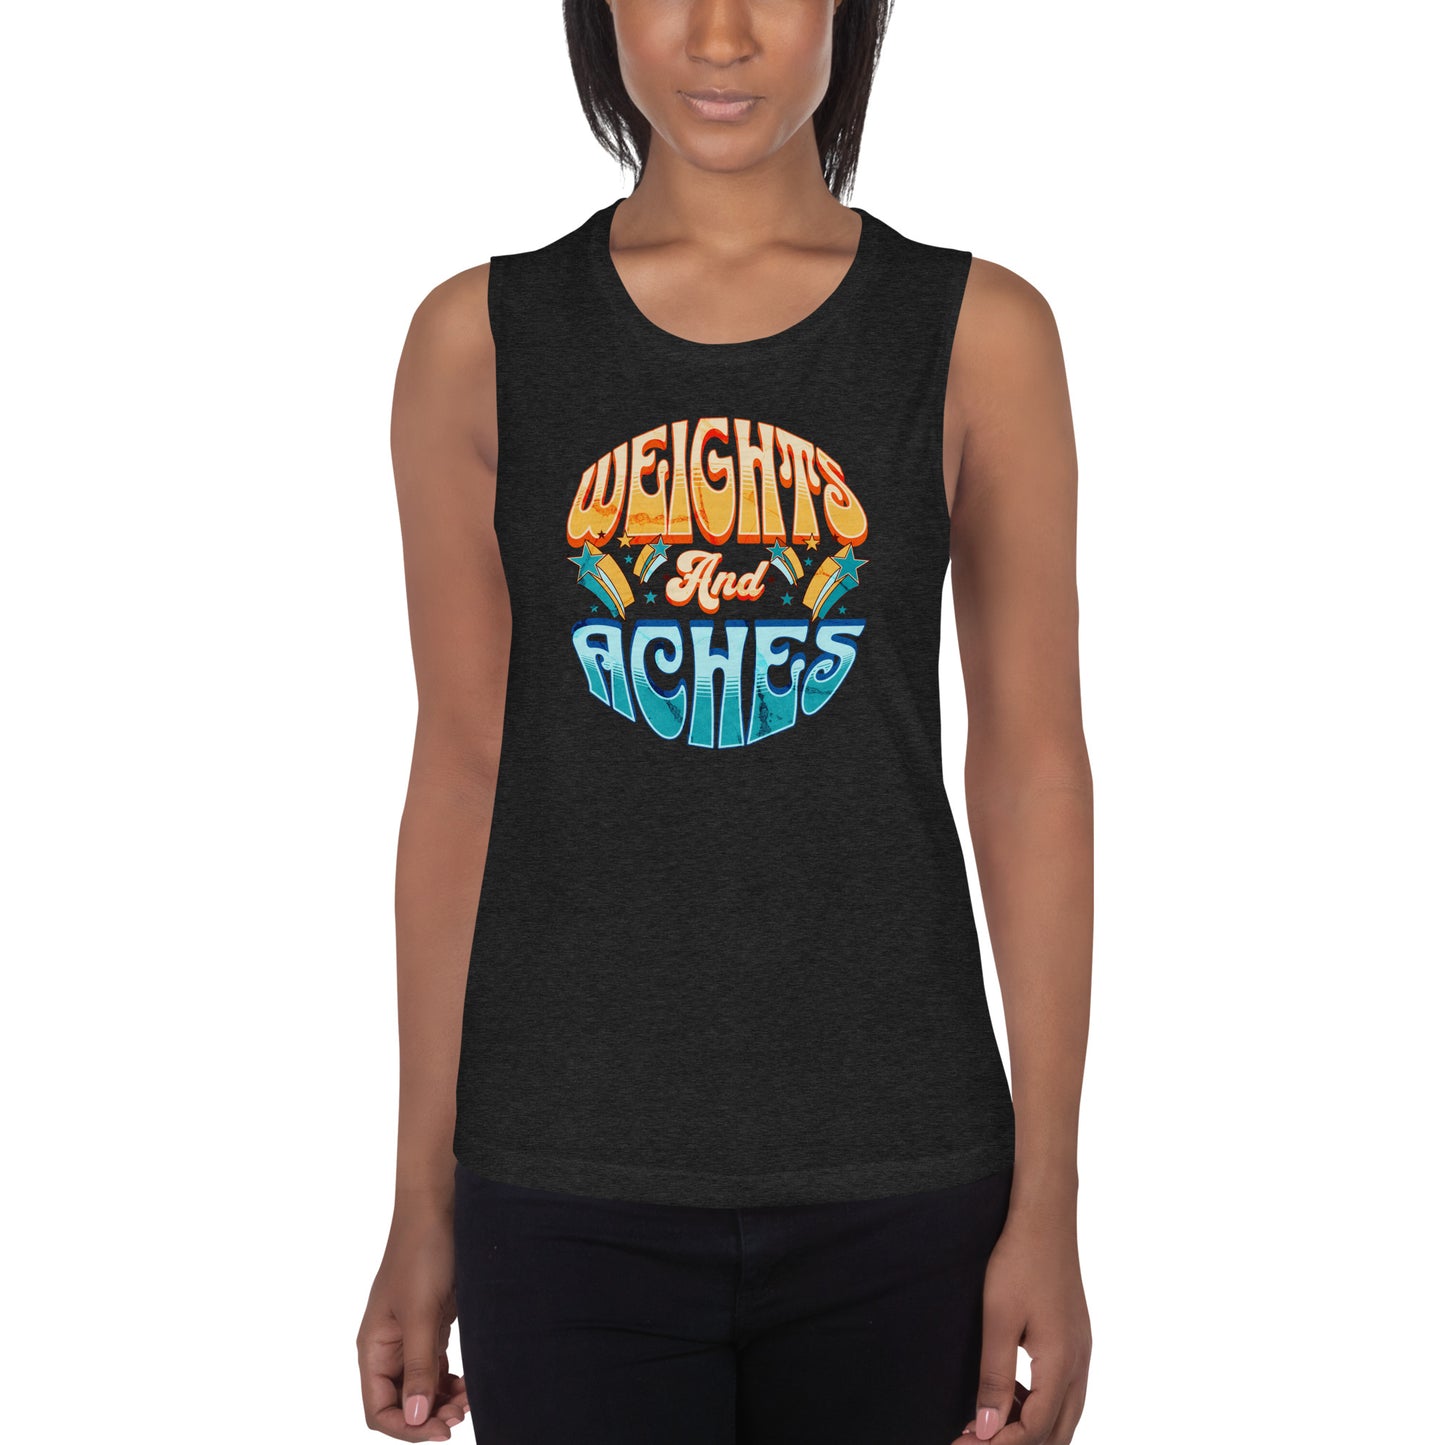 Weights and Aches Ladies’ Muscle Tank